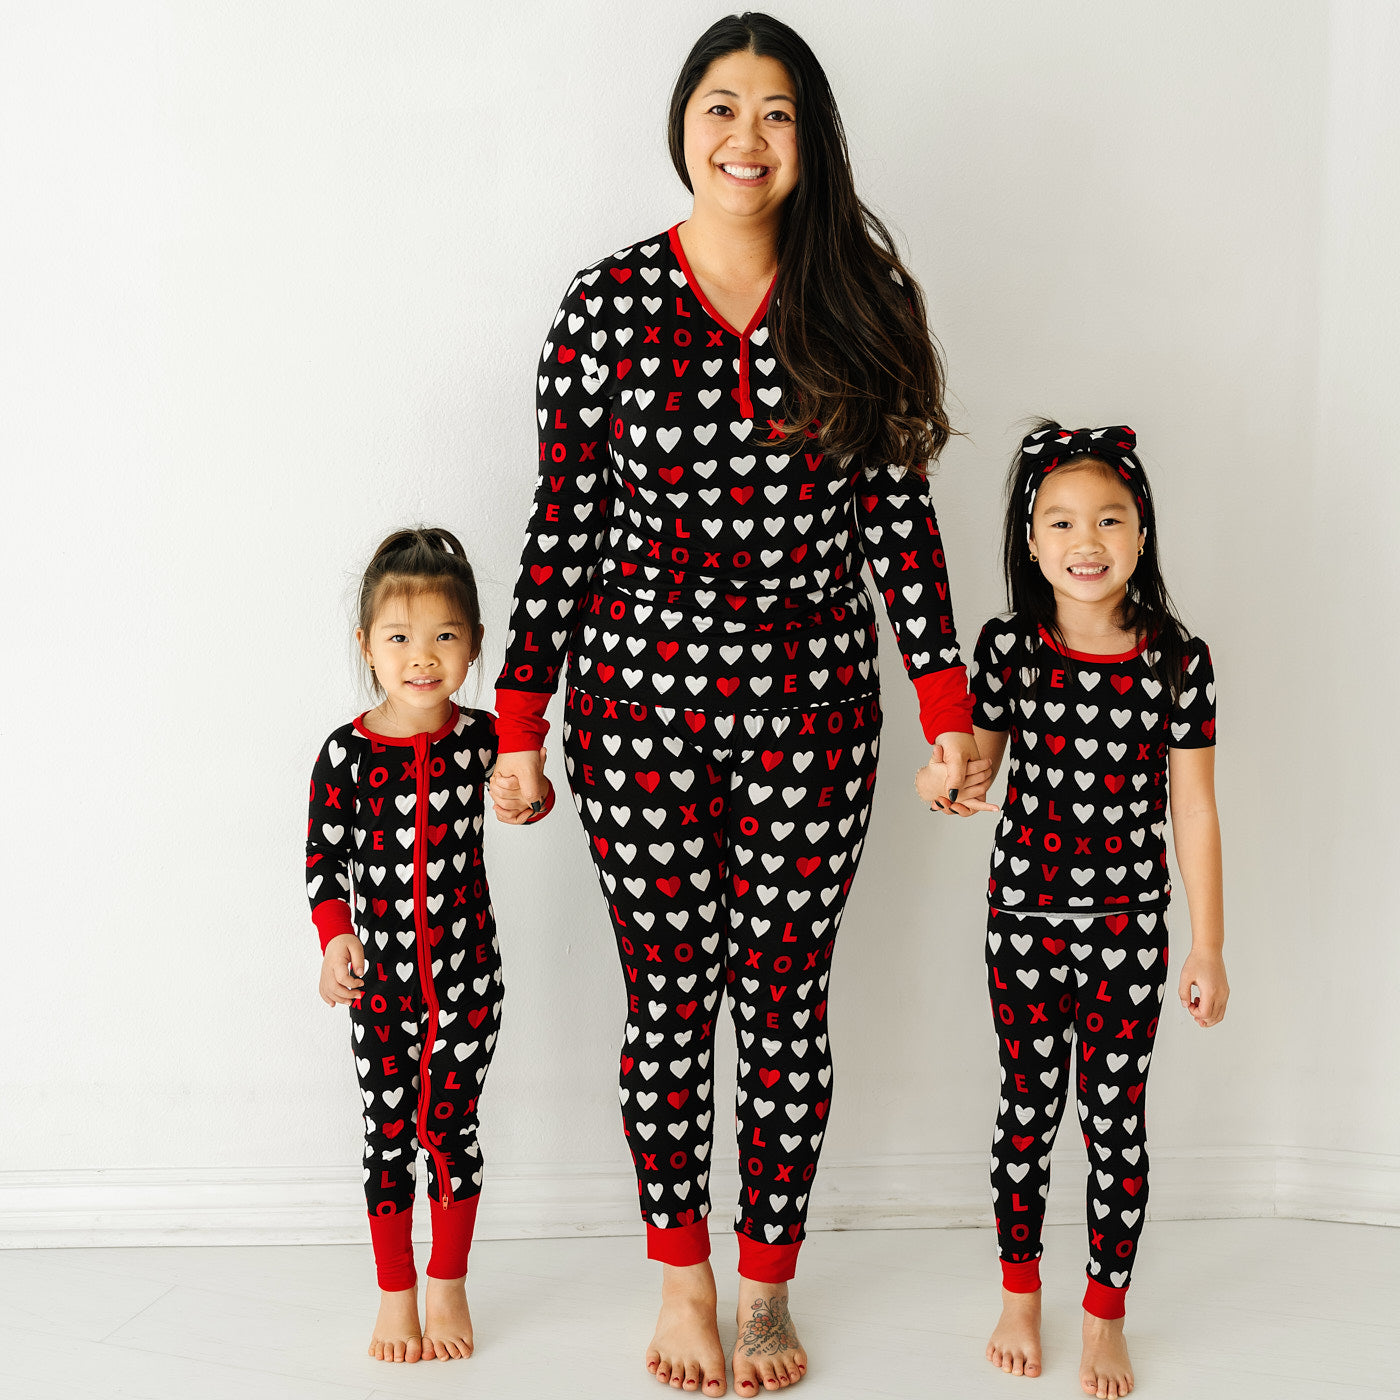 Mother and her two daughters holding hands wearing matching Black XOXO pajama sets. Mom is wearing a women's Black XOXO pajama top and matching women's pajama pants. Children are wearing Black XOXO pajamas in zippy and short sleeve two piece styles paired with a  matching luxe bow headband